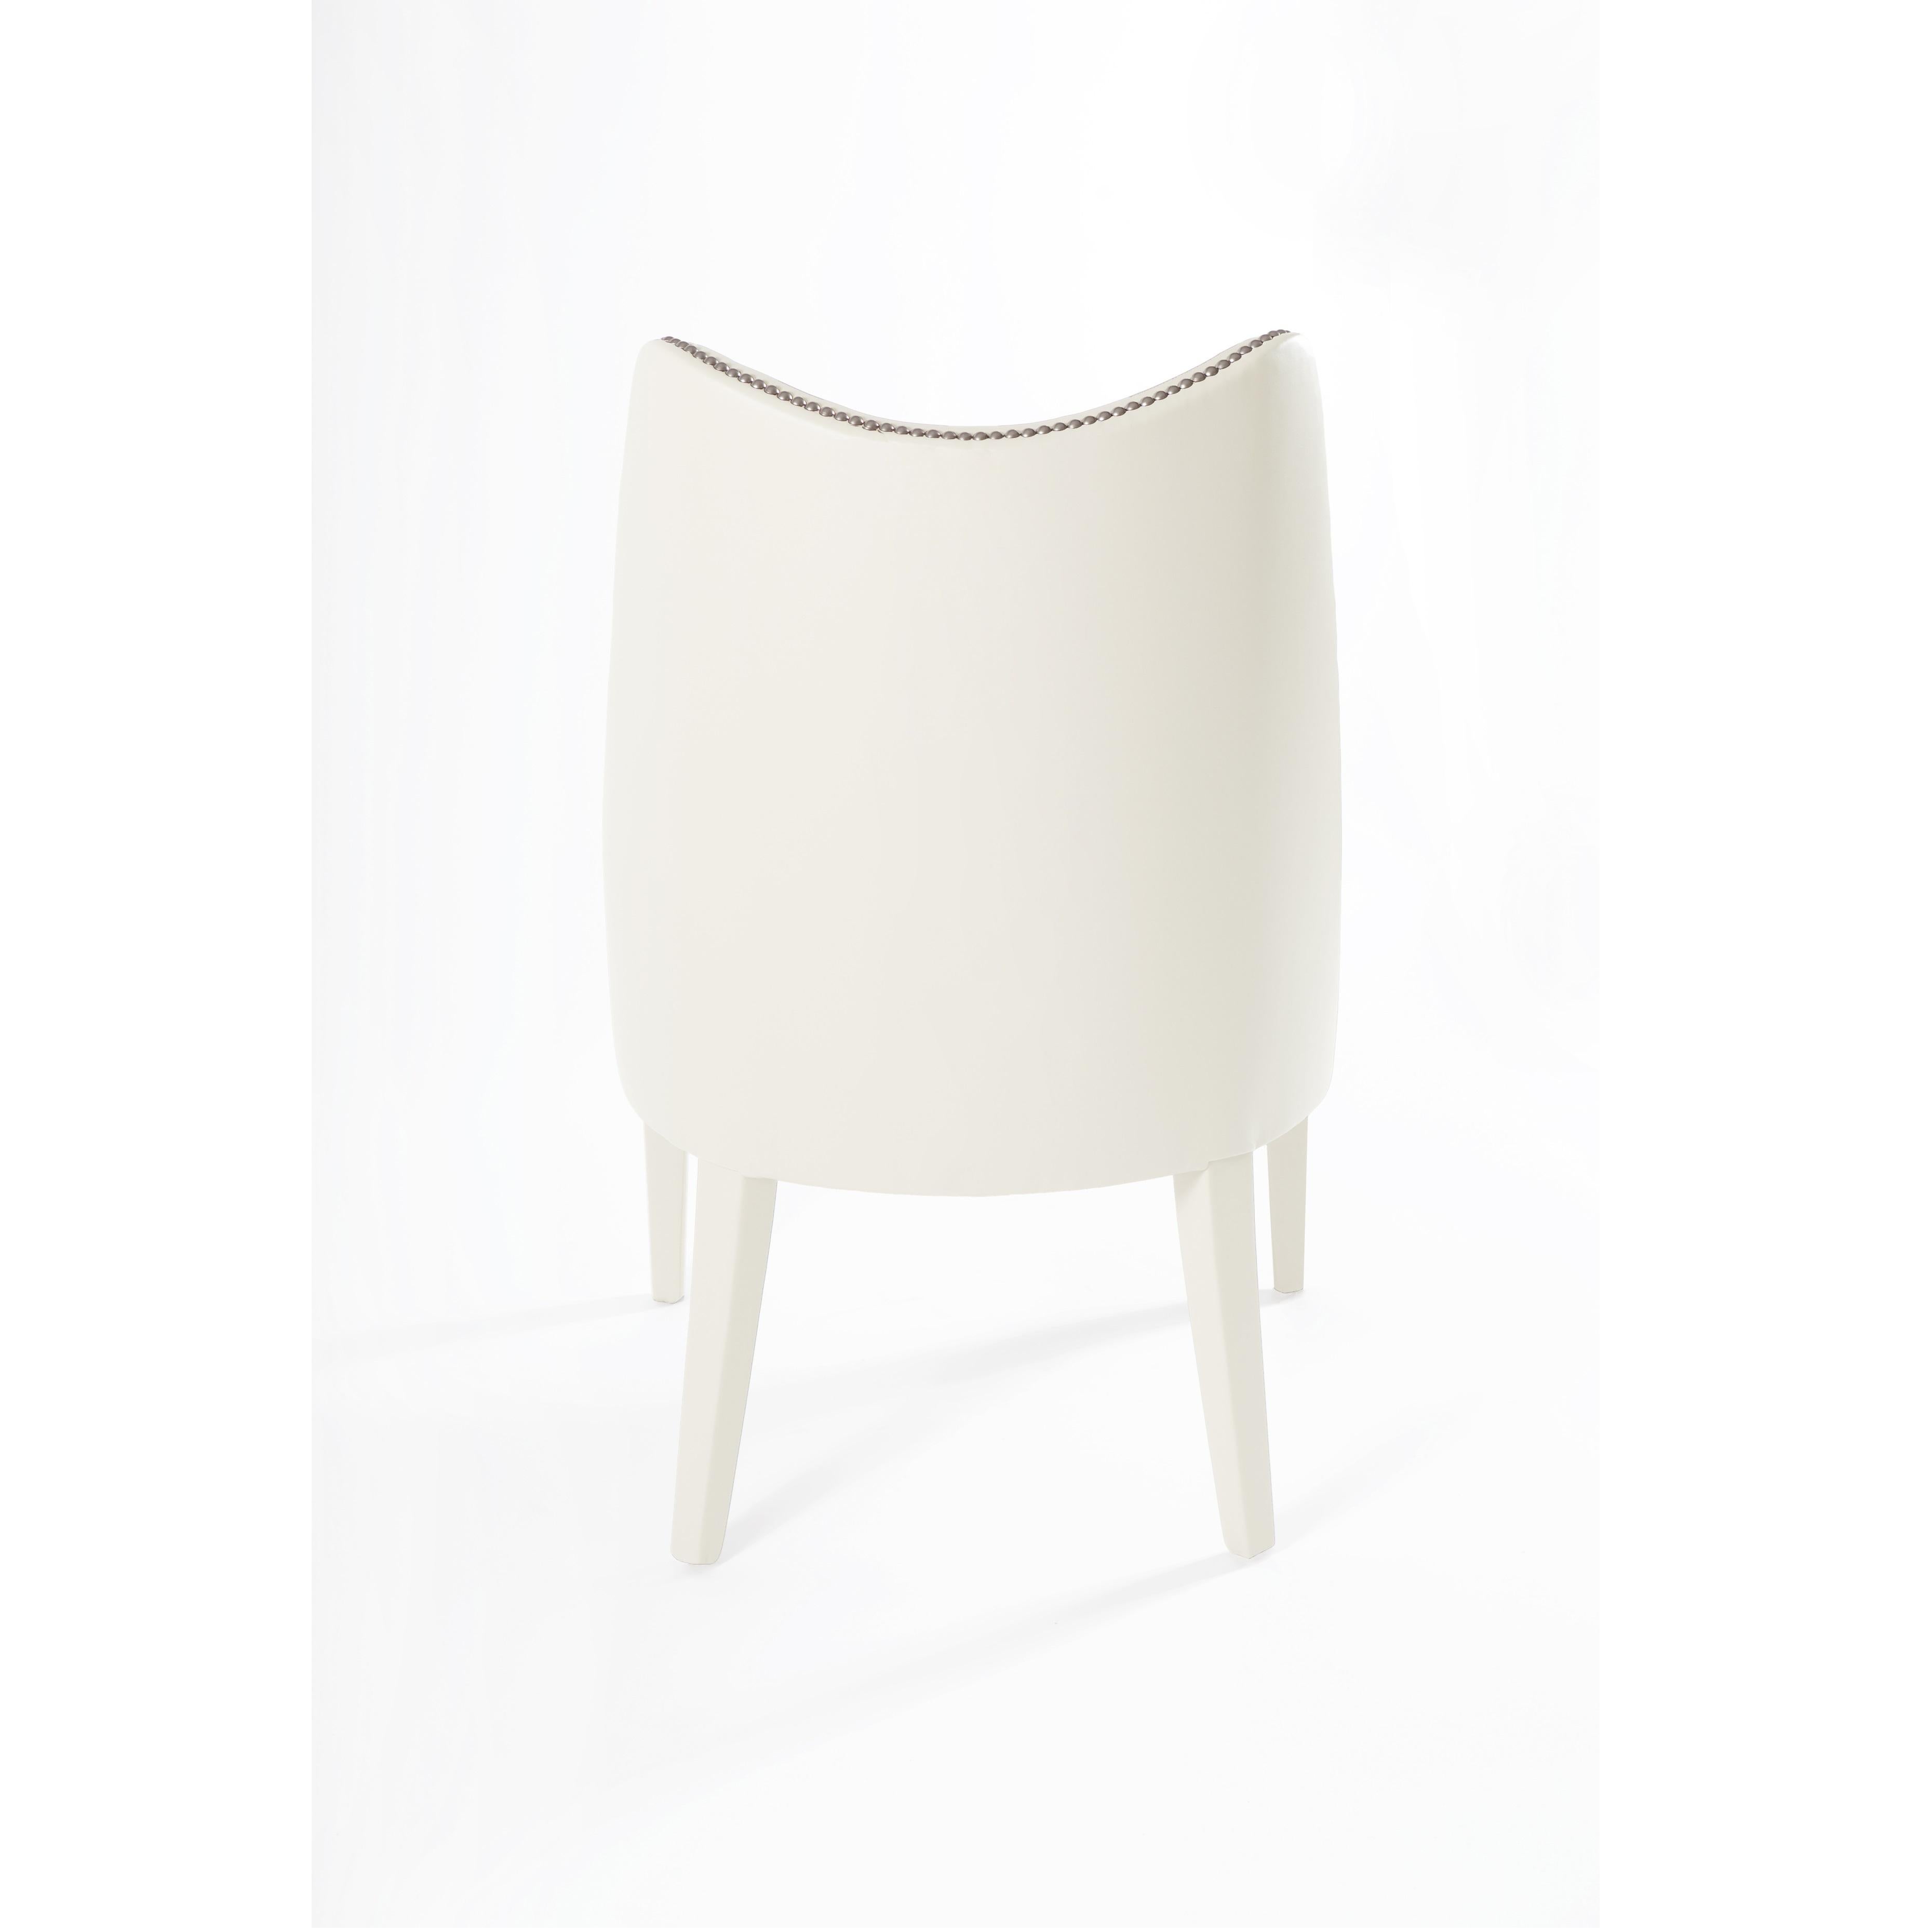 Modern Contemporary Velvet Dining Chair Offered With Nails On The Curve & Back For Sale